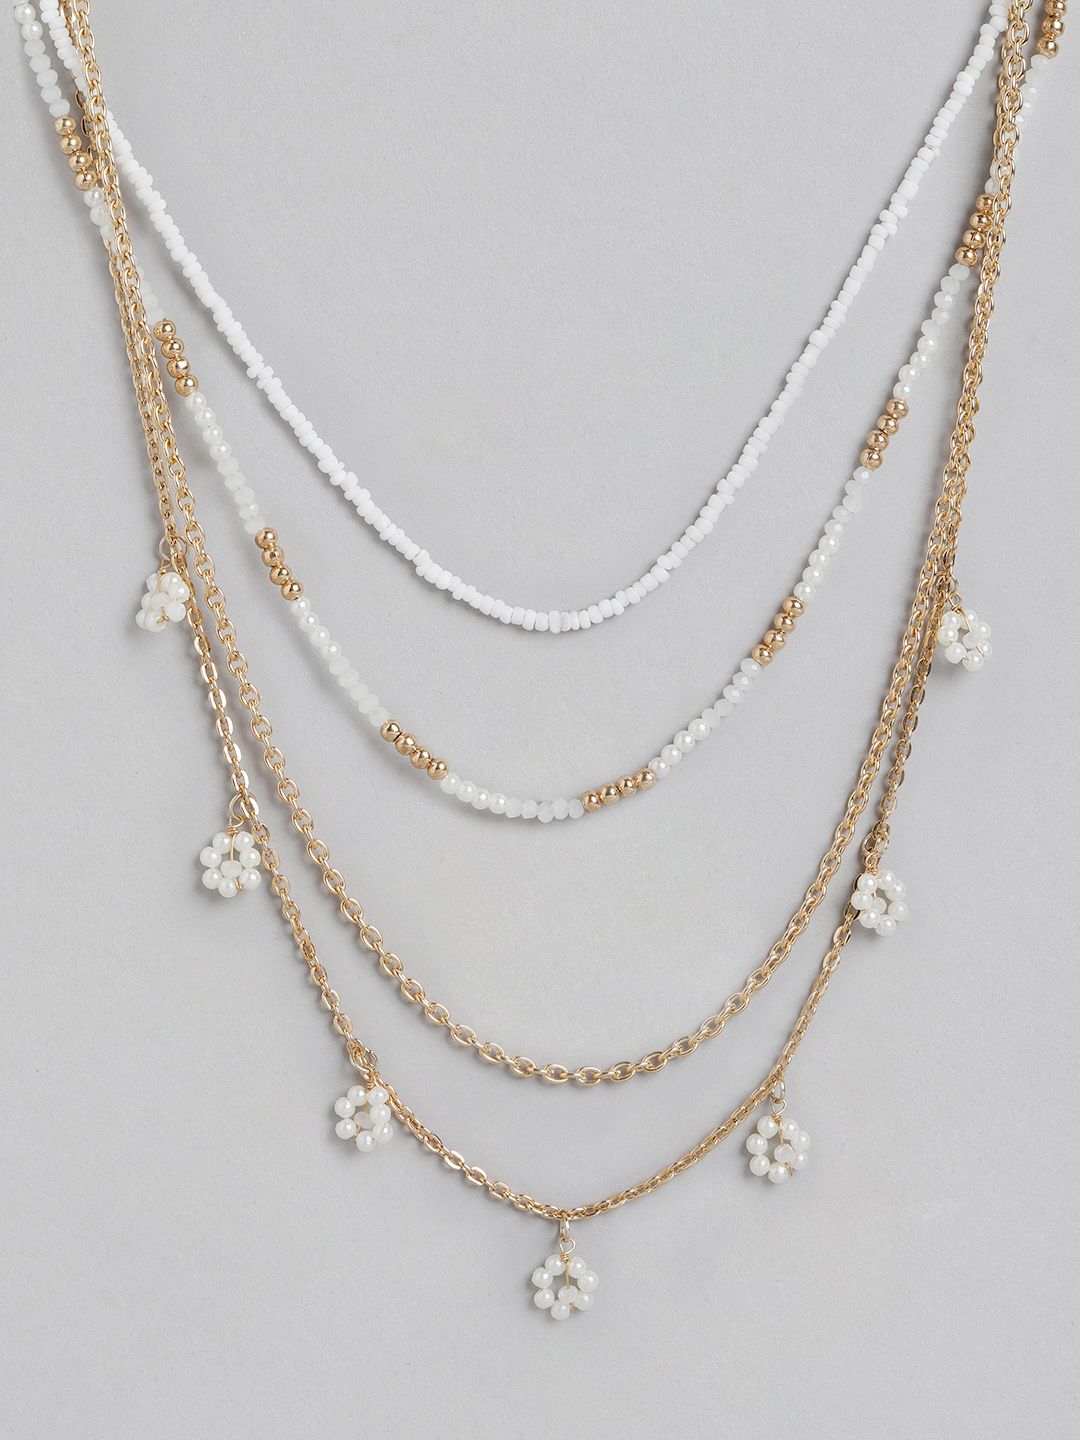 DressBerry Set of 4 Gold-Toned & White Beaded Handcrafted Necklaces Price in India